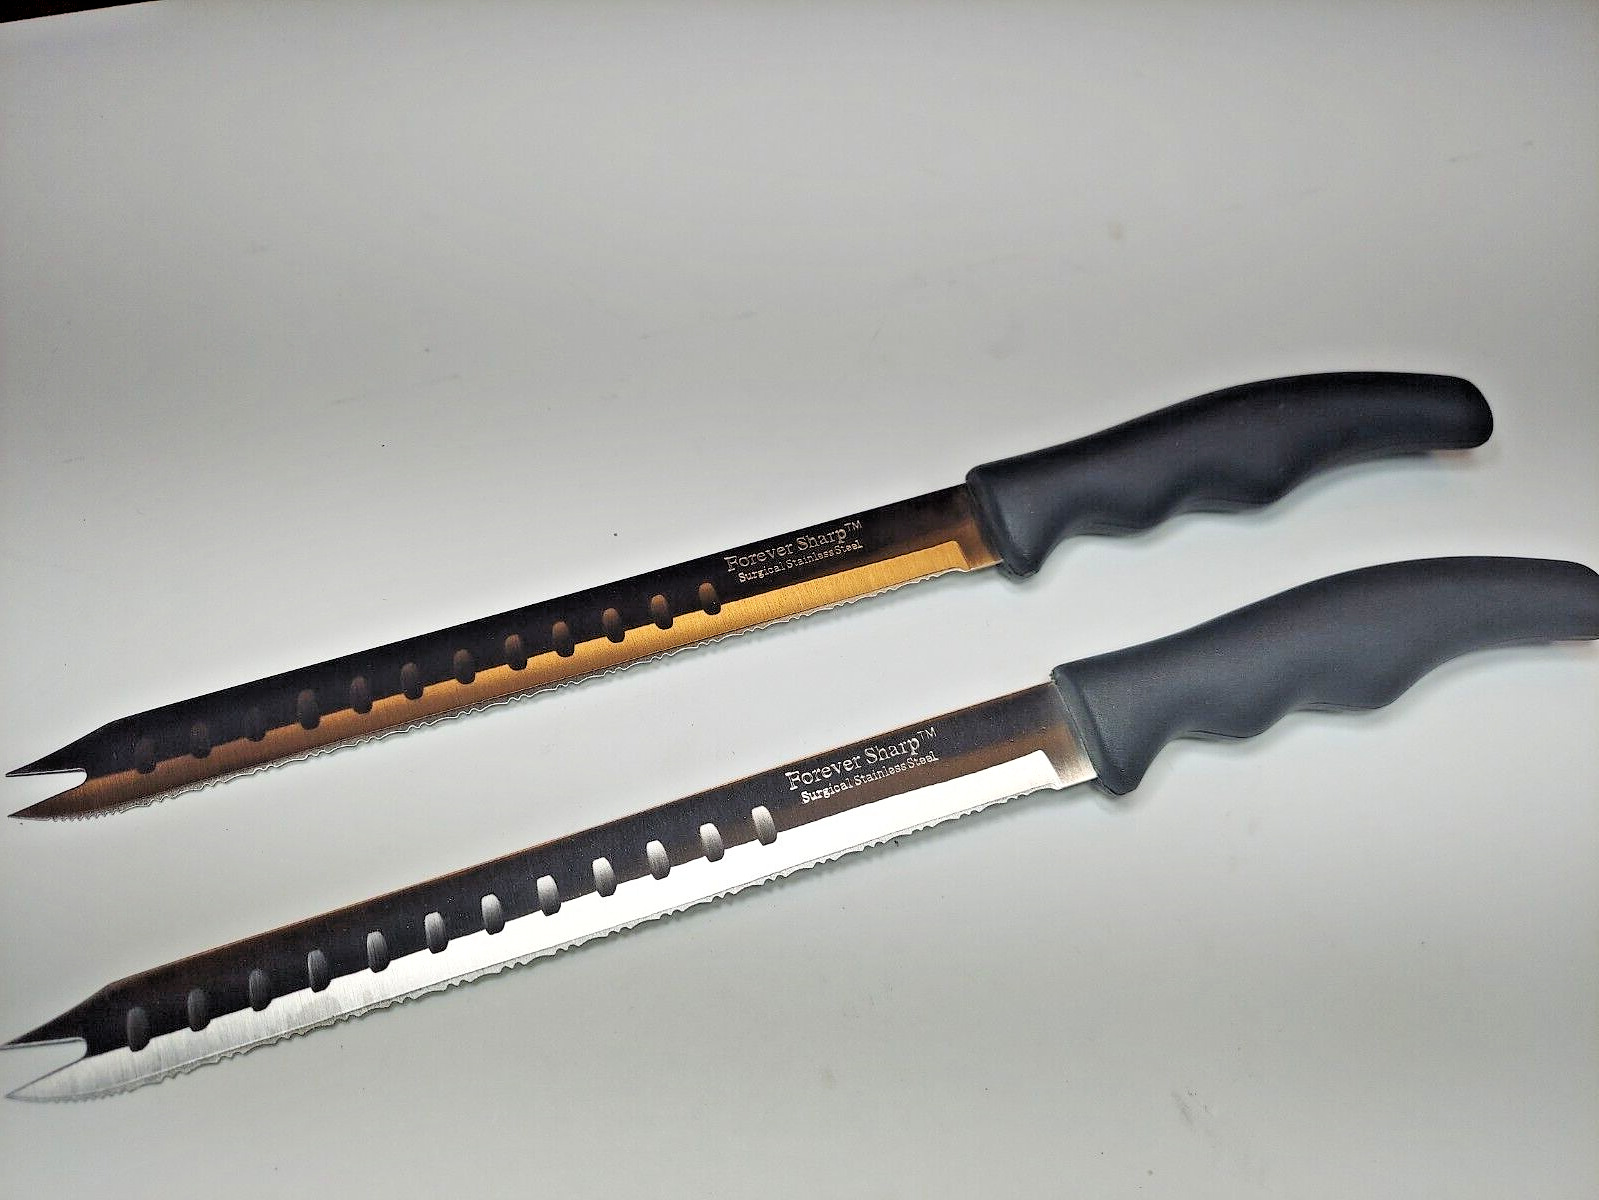 Pair of 2 Forever Sharp Knife Surgical Stainless Steel 8” Serrated Carving Blade